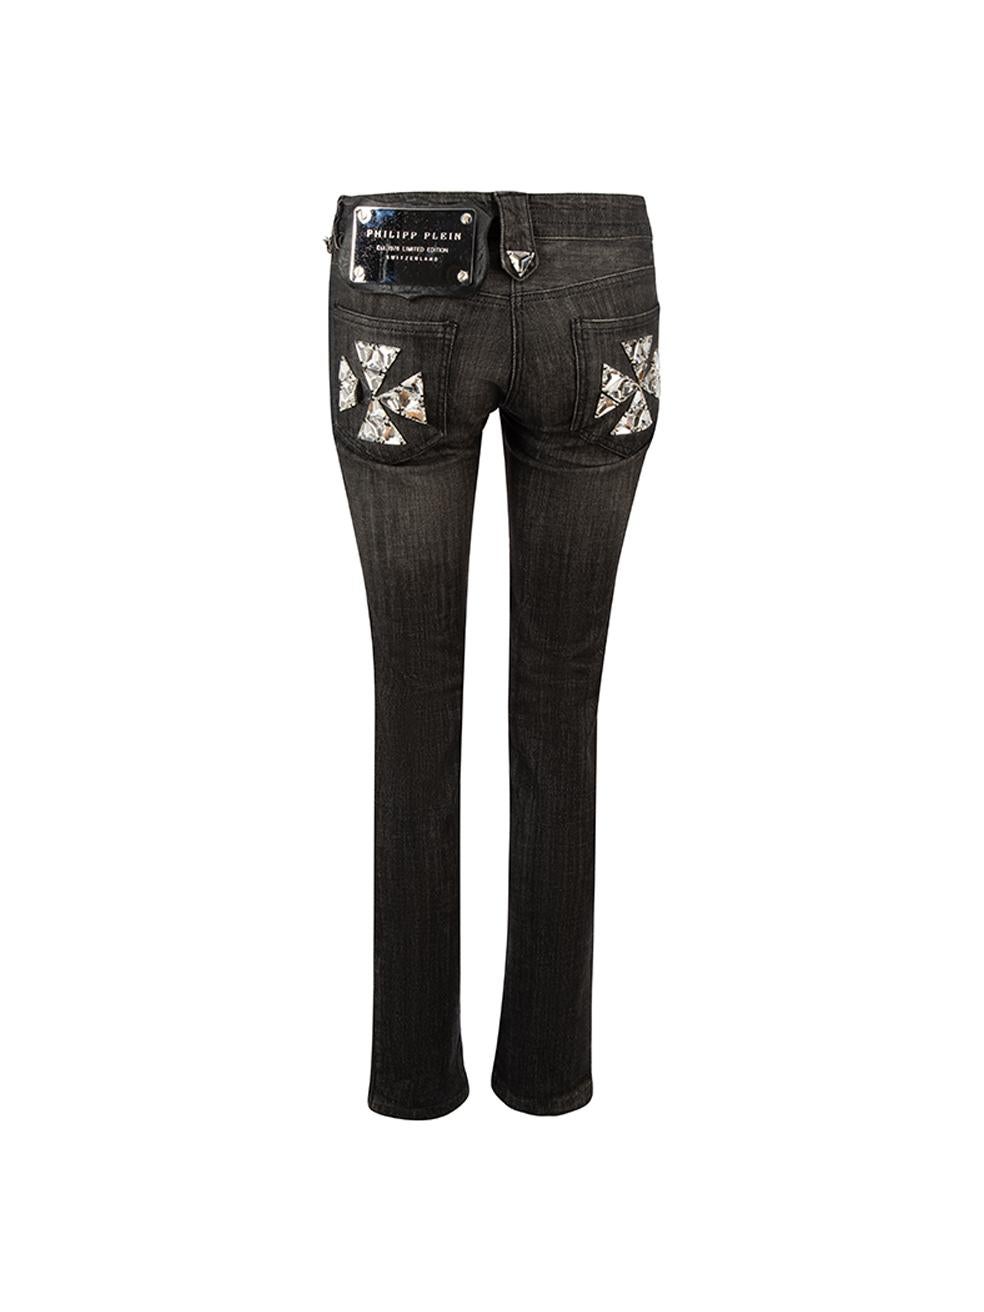 Black Philipp Plein Women's Anthracite Faded Skinny Jeans For Sale